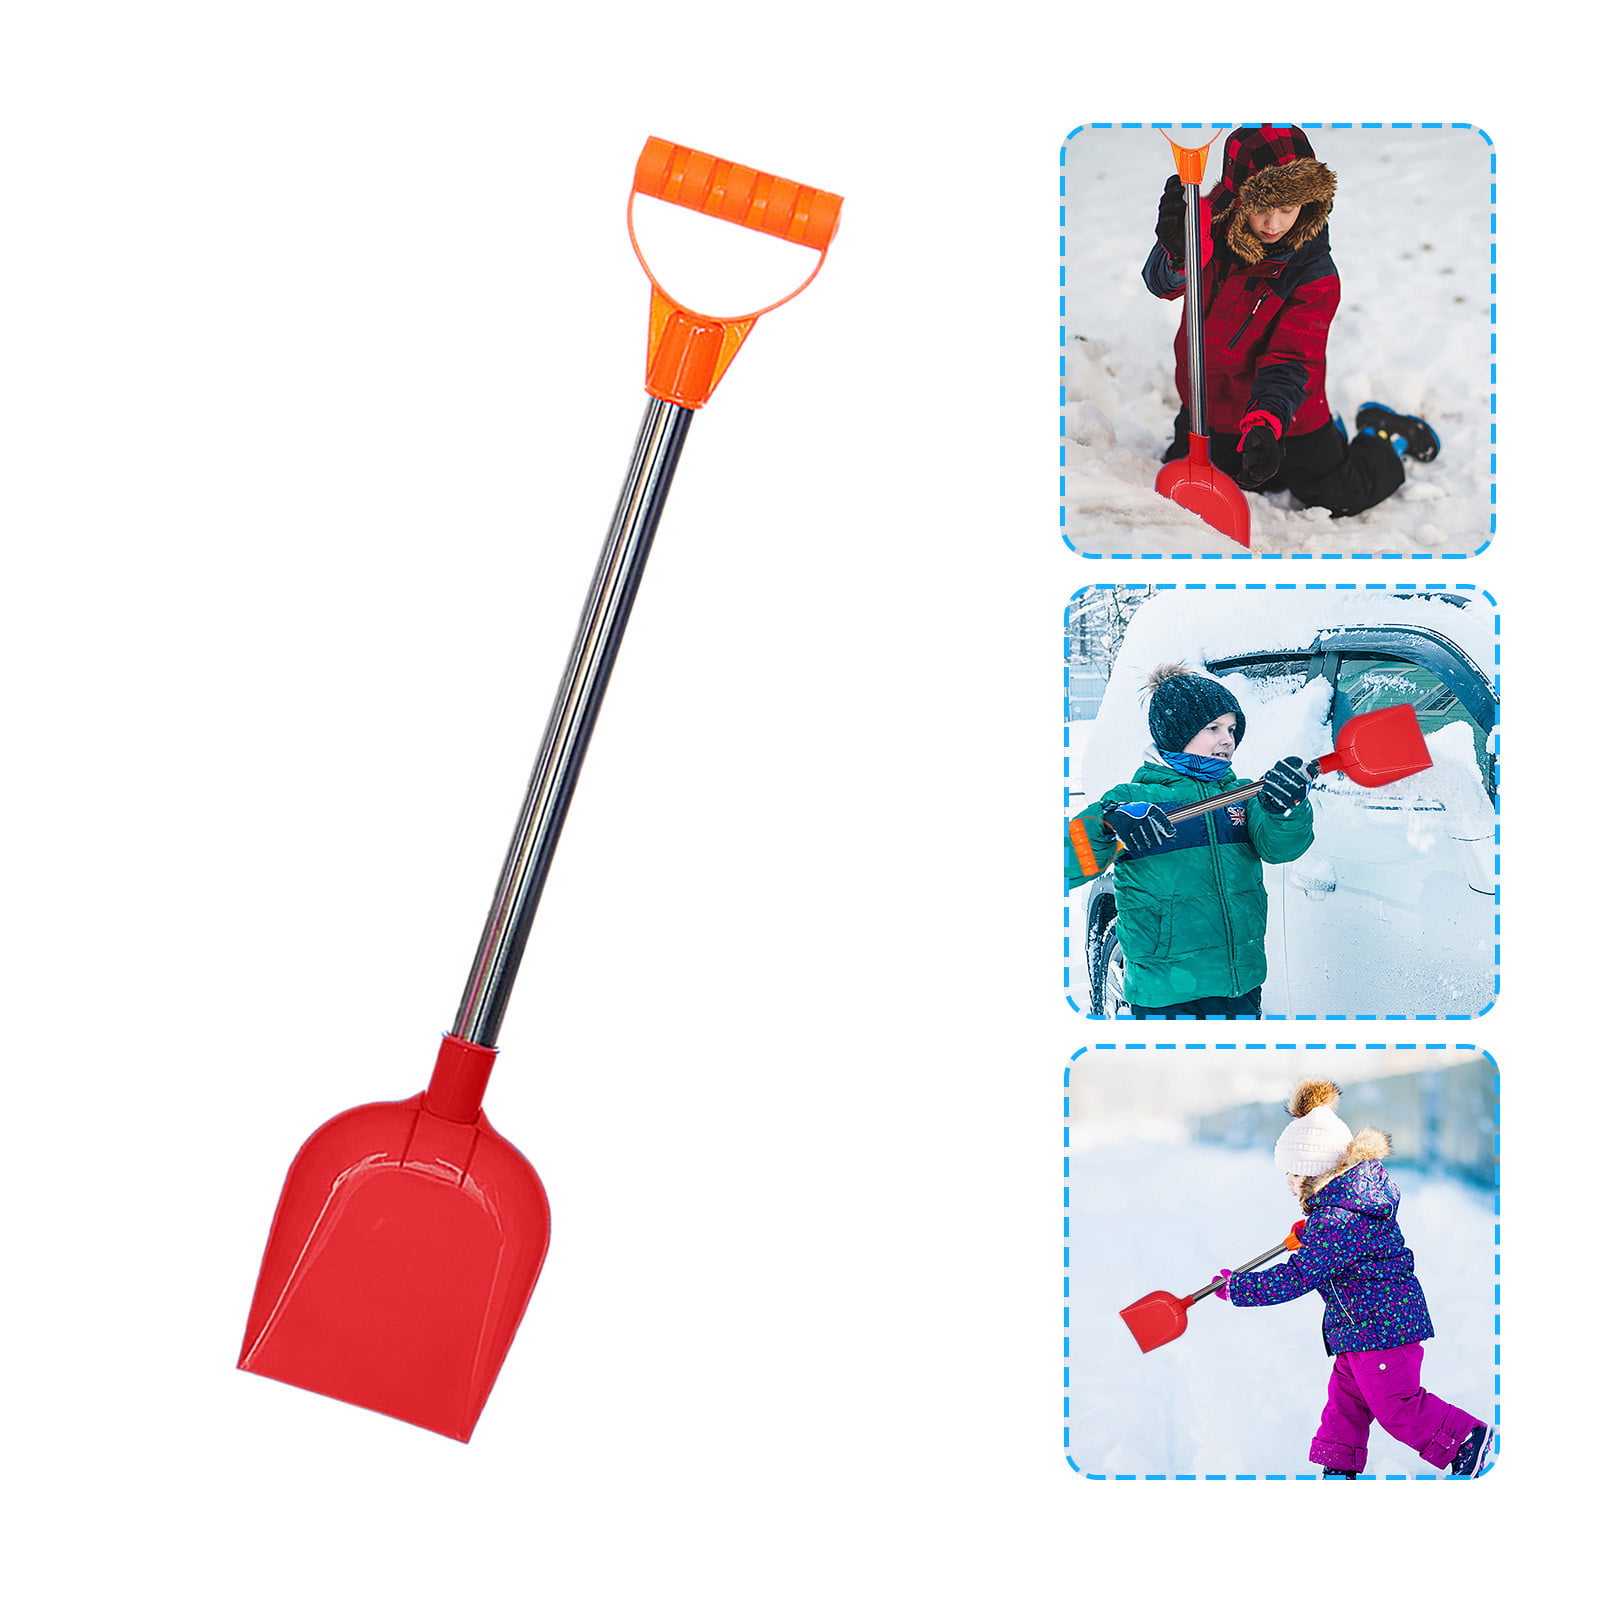 4Pcs Childrens Snow Shovel Heavy Duty Beach Diggers Sand Scoop Snow Shovels for Kid-Dune Spoons Beach Diggers-Plastic Kid Sand or Snow 18inch 4 Color Combinations 